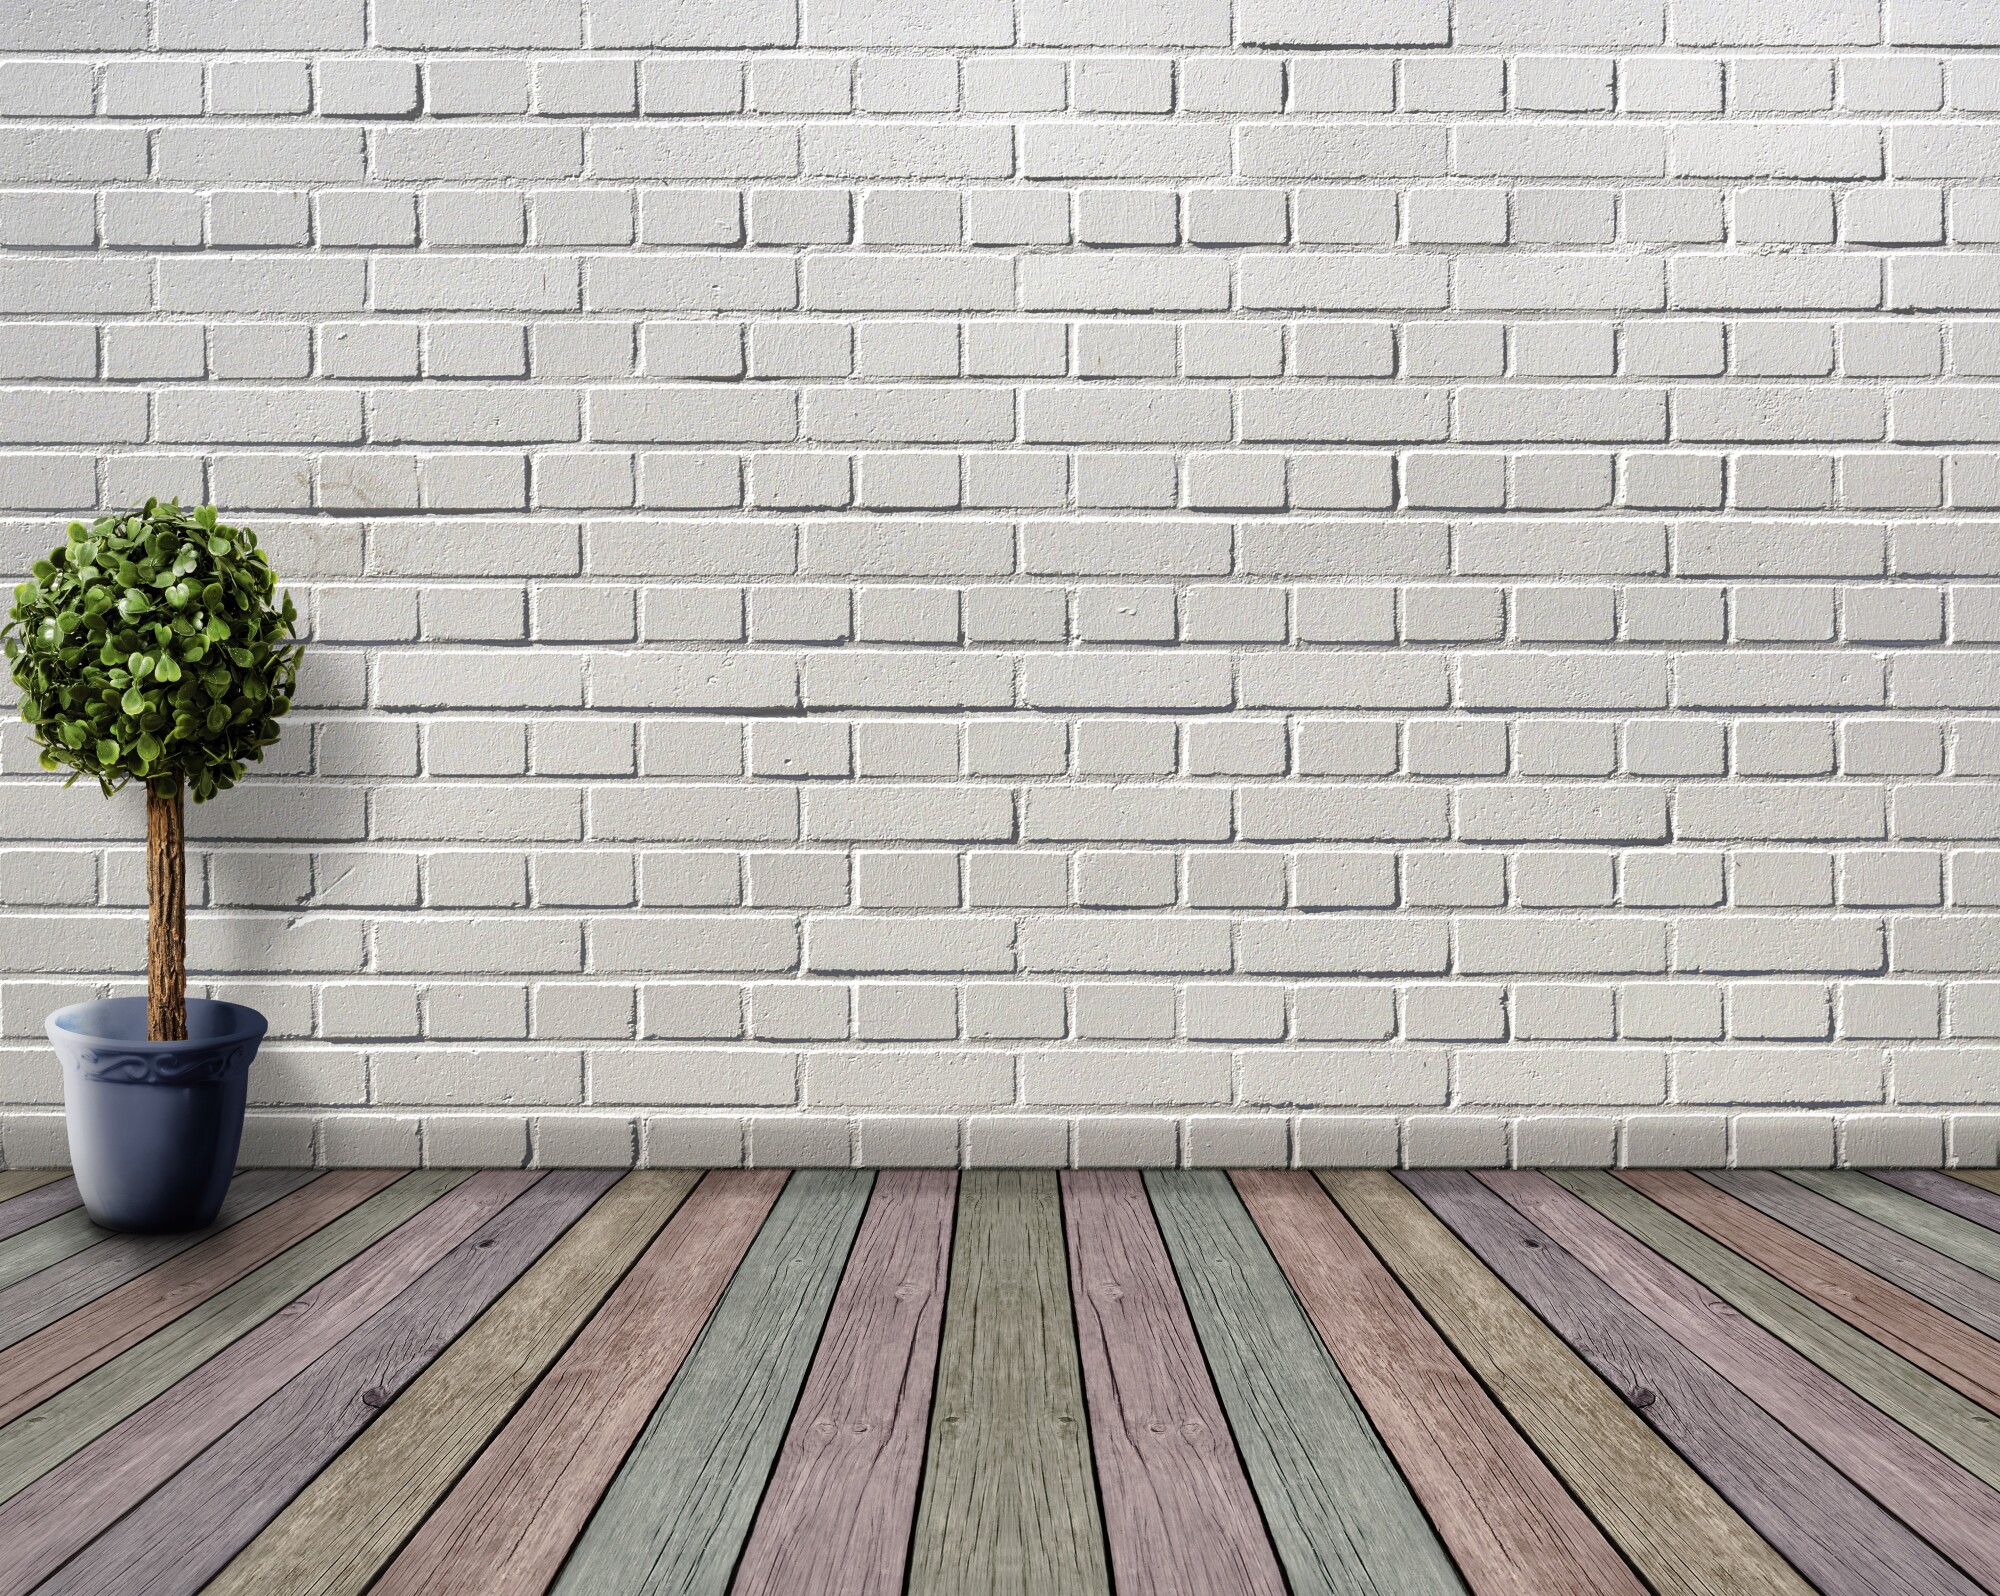 If you're planning on giving the outdated floors in your home a much needed upgrade, find out how to choose the perfect new floors!